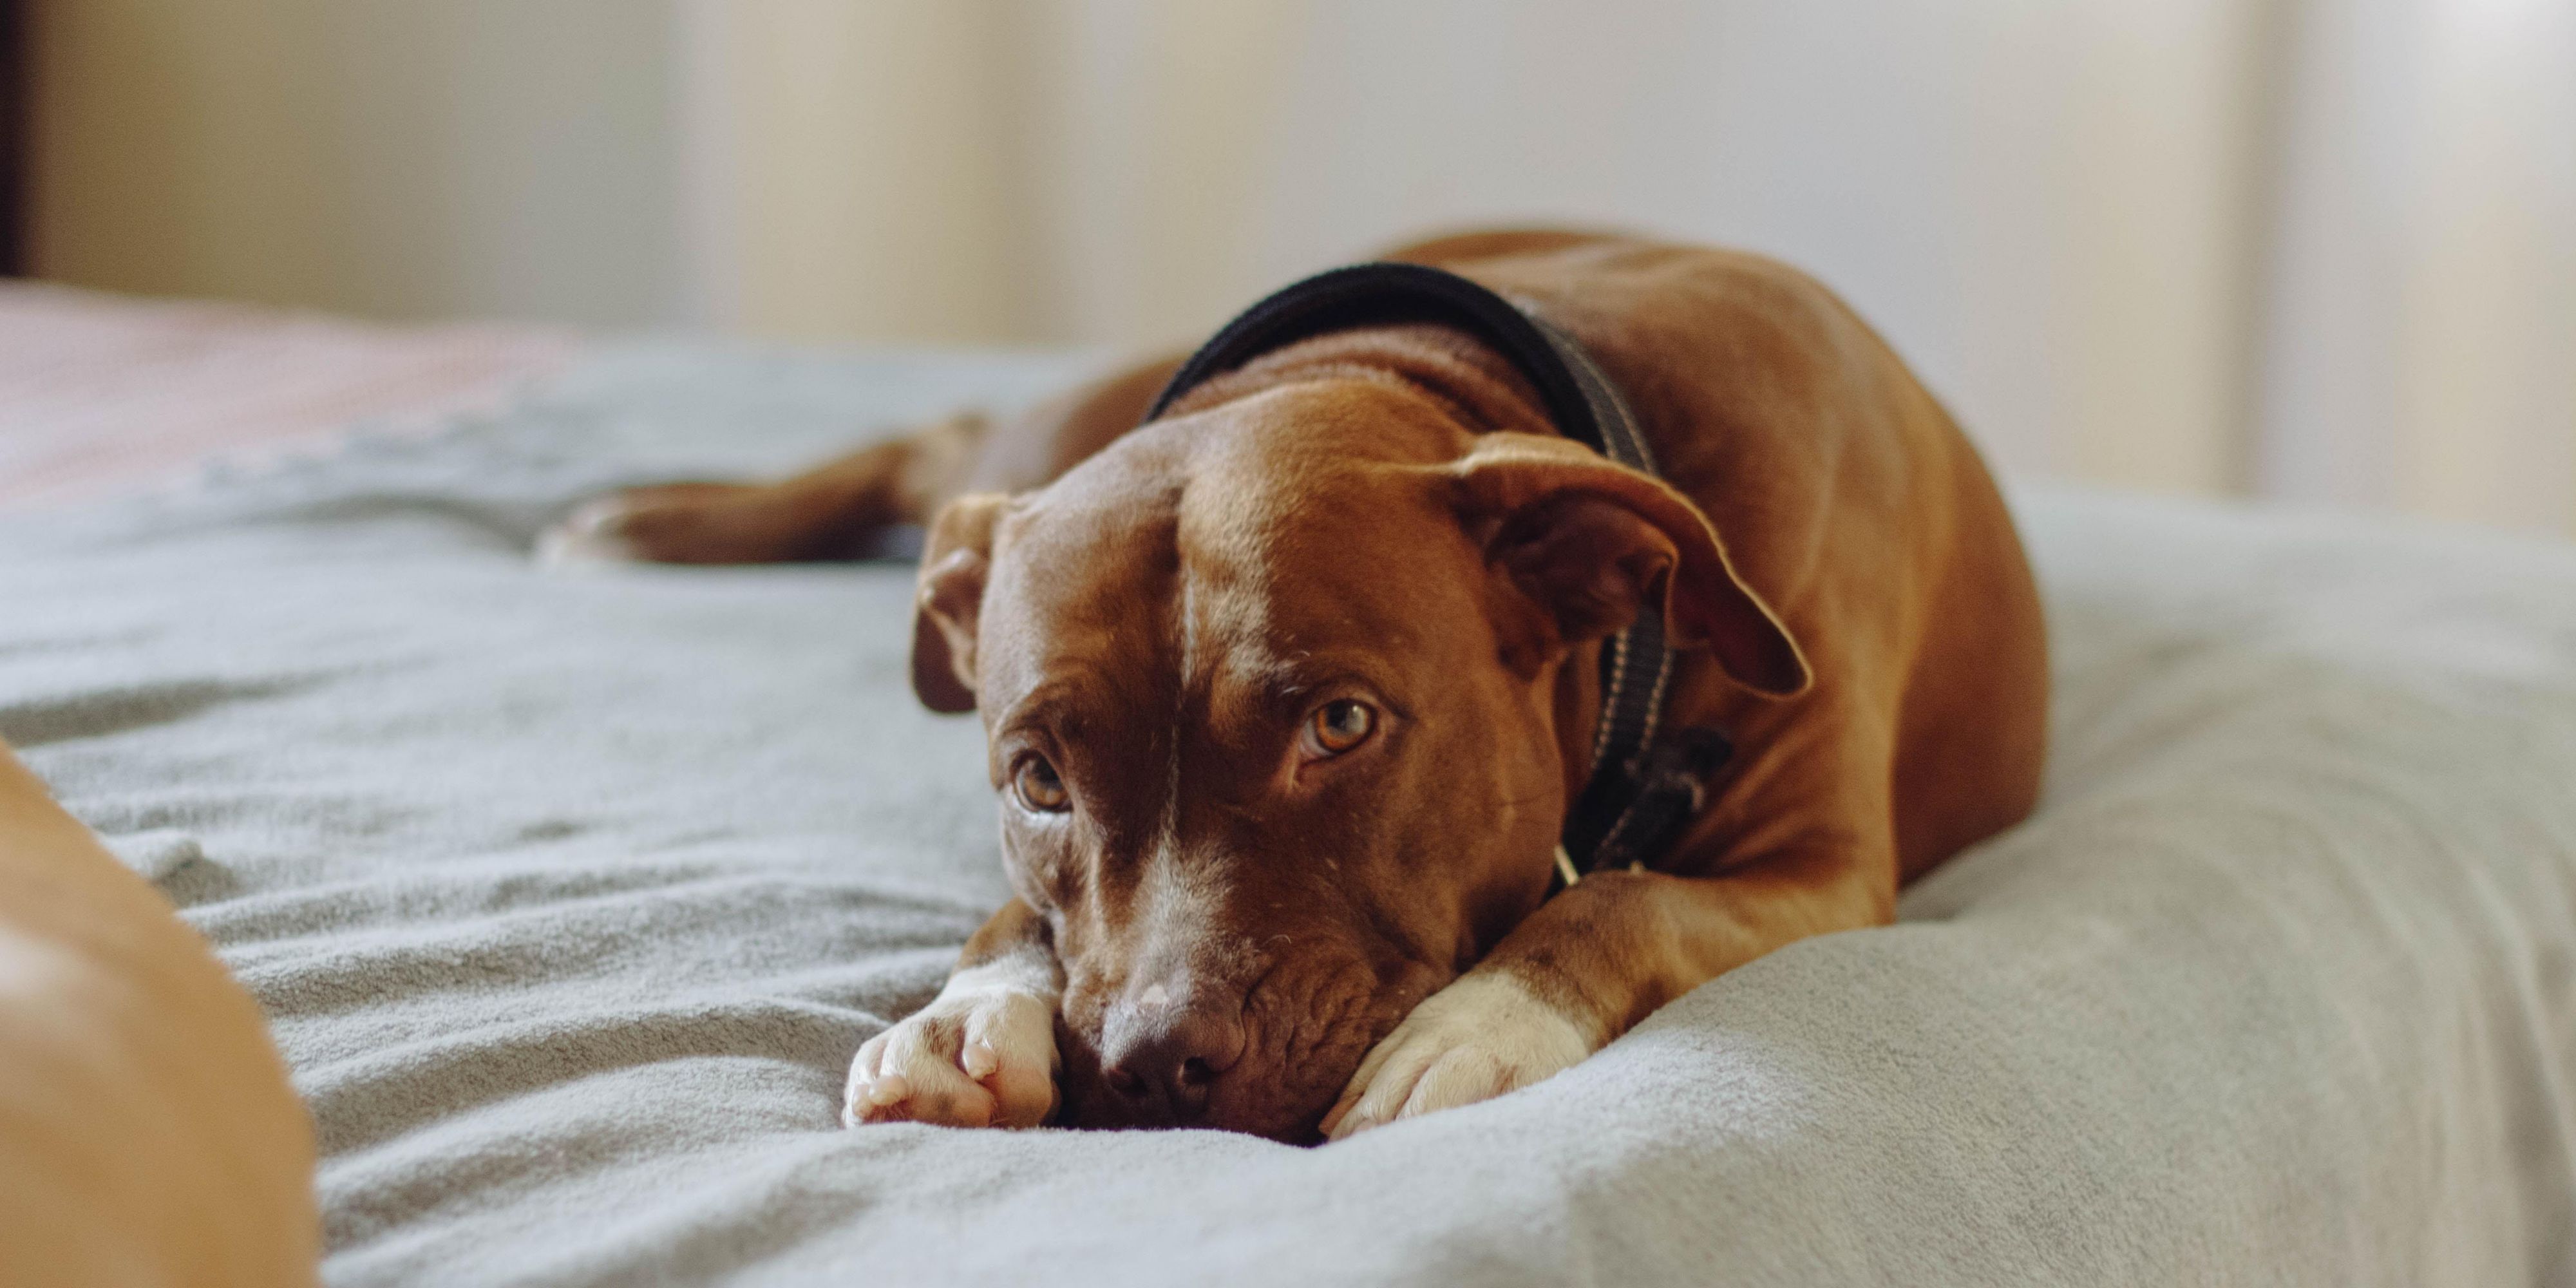 Bring your furry friends with you on vacation when you stay at our hotel. We love having dogs visit us. View our pet policy to see what any current restrictions are, and our minimal pet fee for their stay. 